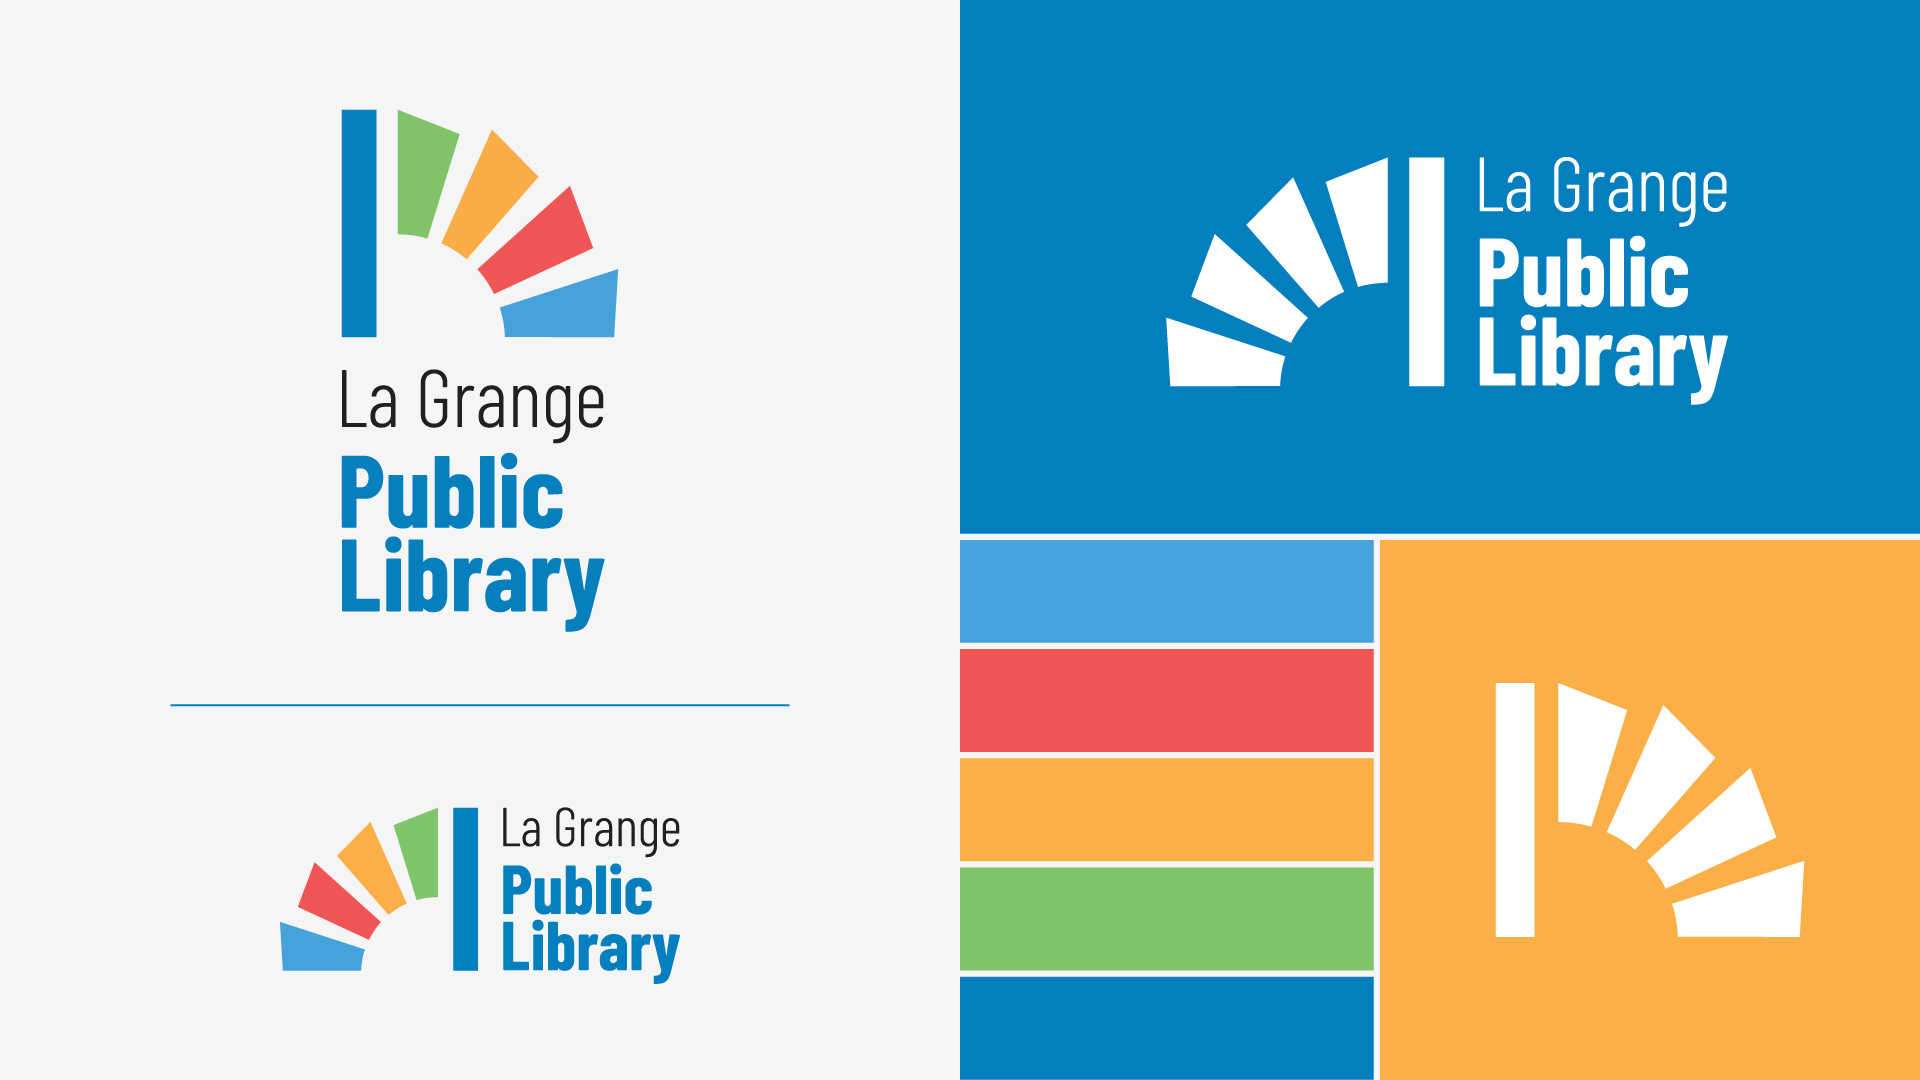 La Grange Library logo on different colored backgrounds